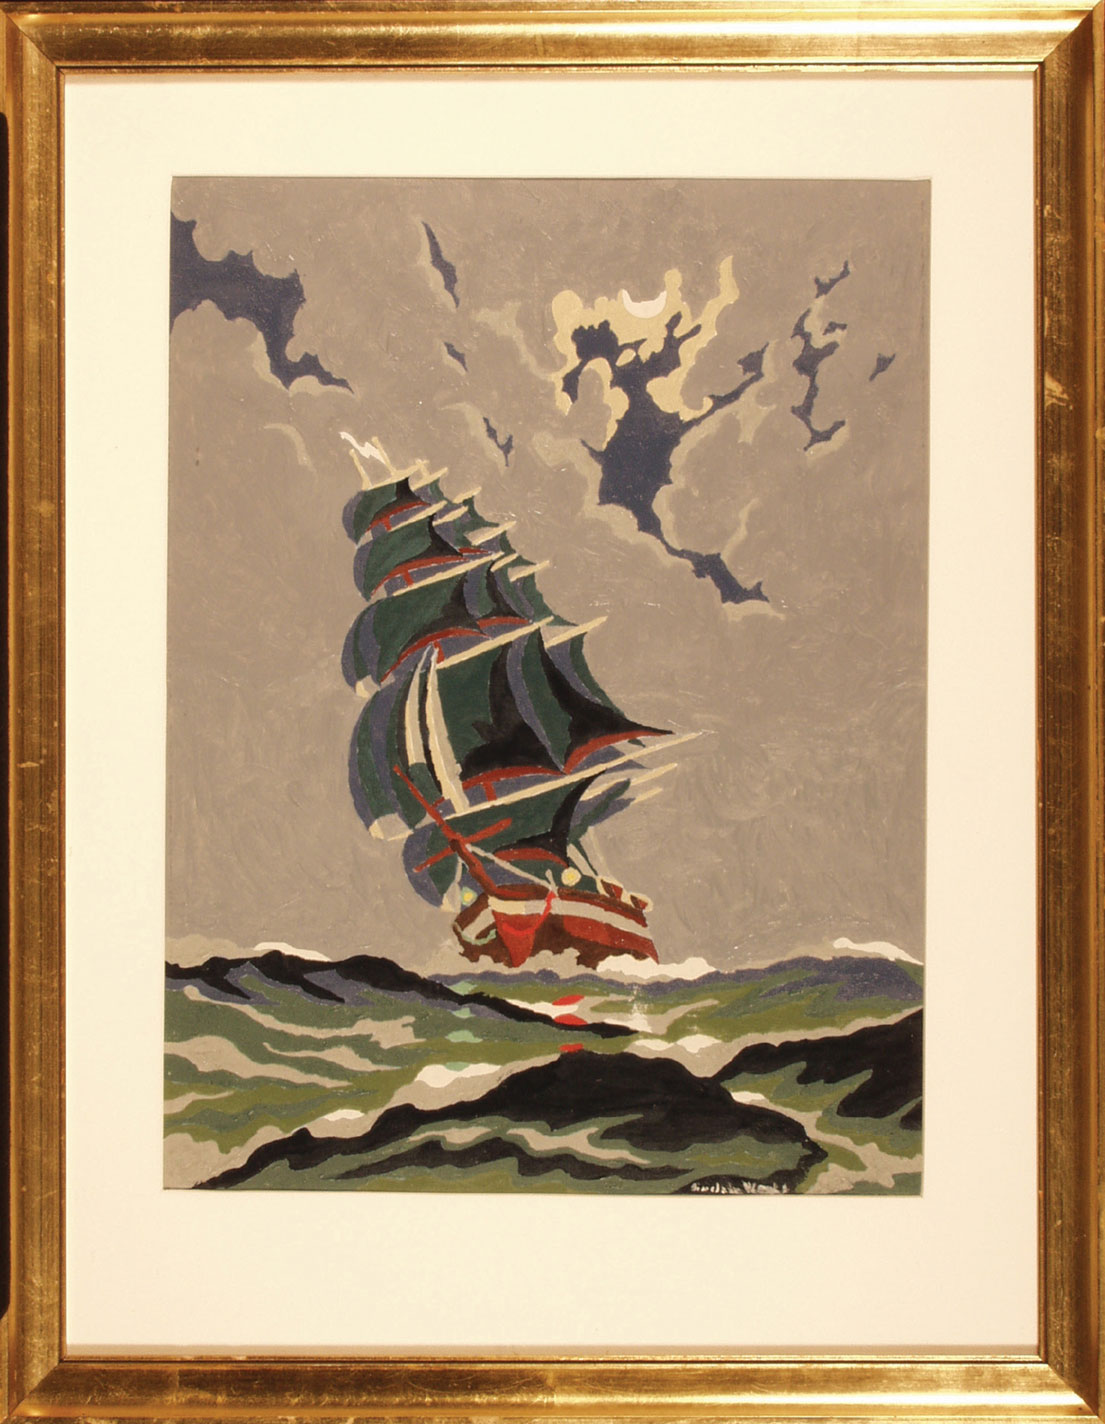 Painting of a big ship in the waves by Sinclair Weeks, US Secretary of Commerce from 1953 to 1958.